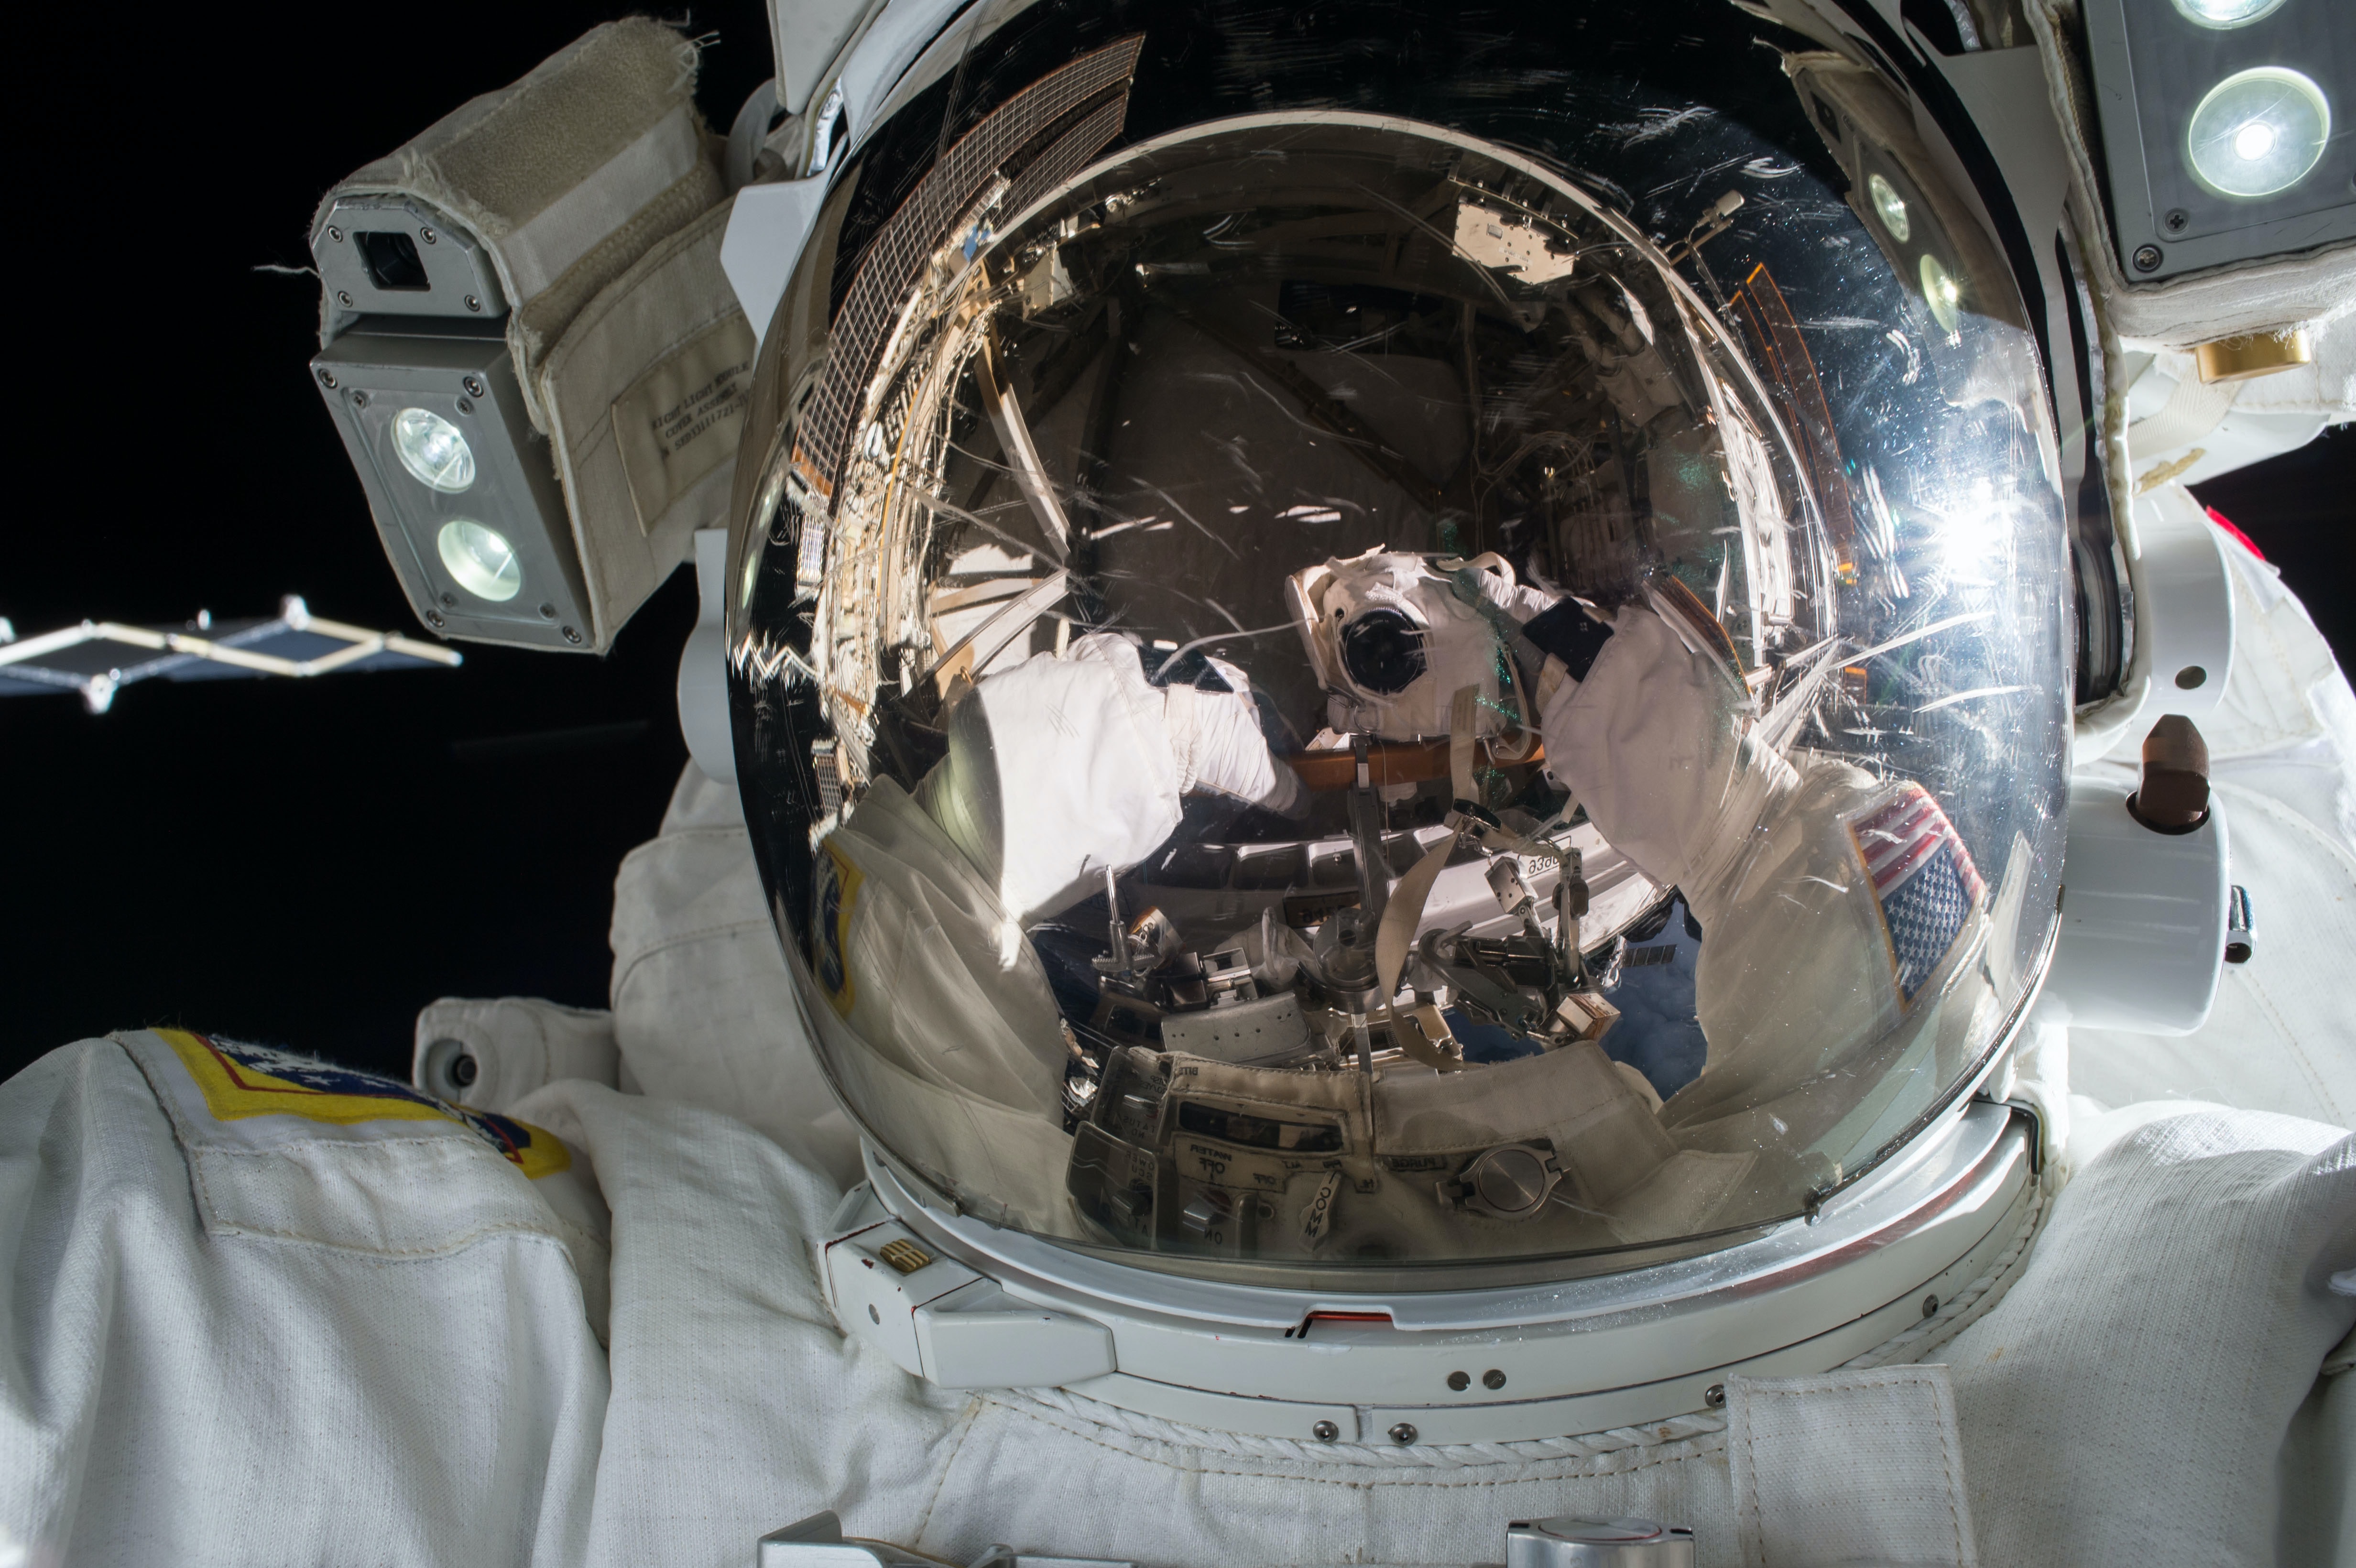 A close-up of an astronaut's helmet in space